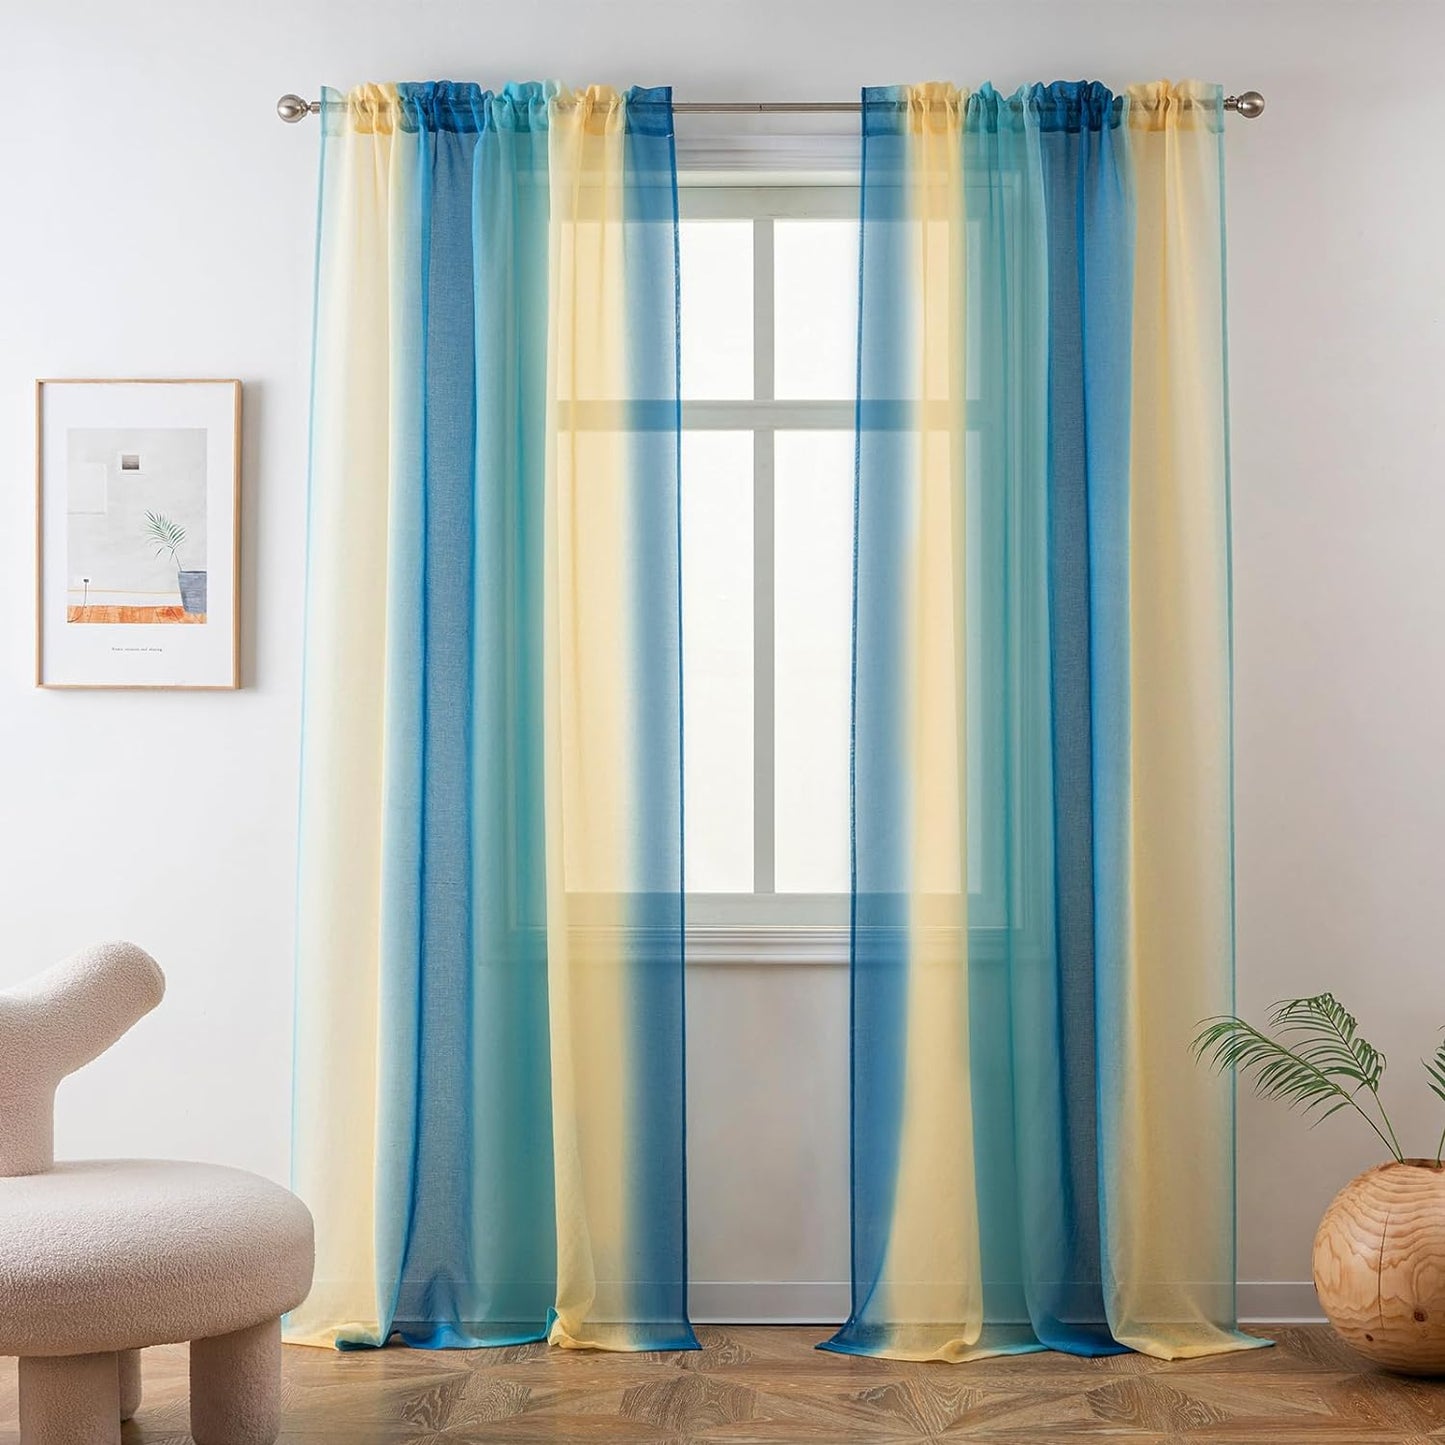 Yancorp 2 Panel Sets Semi Bedroom Curtains 63 Inch Length Sheer Rod Pocket Curtain Linen Teal Turquoise Purple Ombre Girls Living Room Mermaid Bedroom Nursery Kids Decor (Turquoise Purple, 40"X63")  Yancorp Blue Beige 52"X84" 